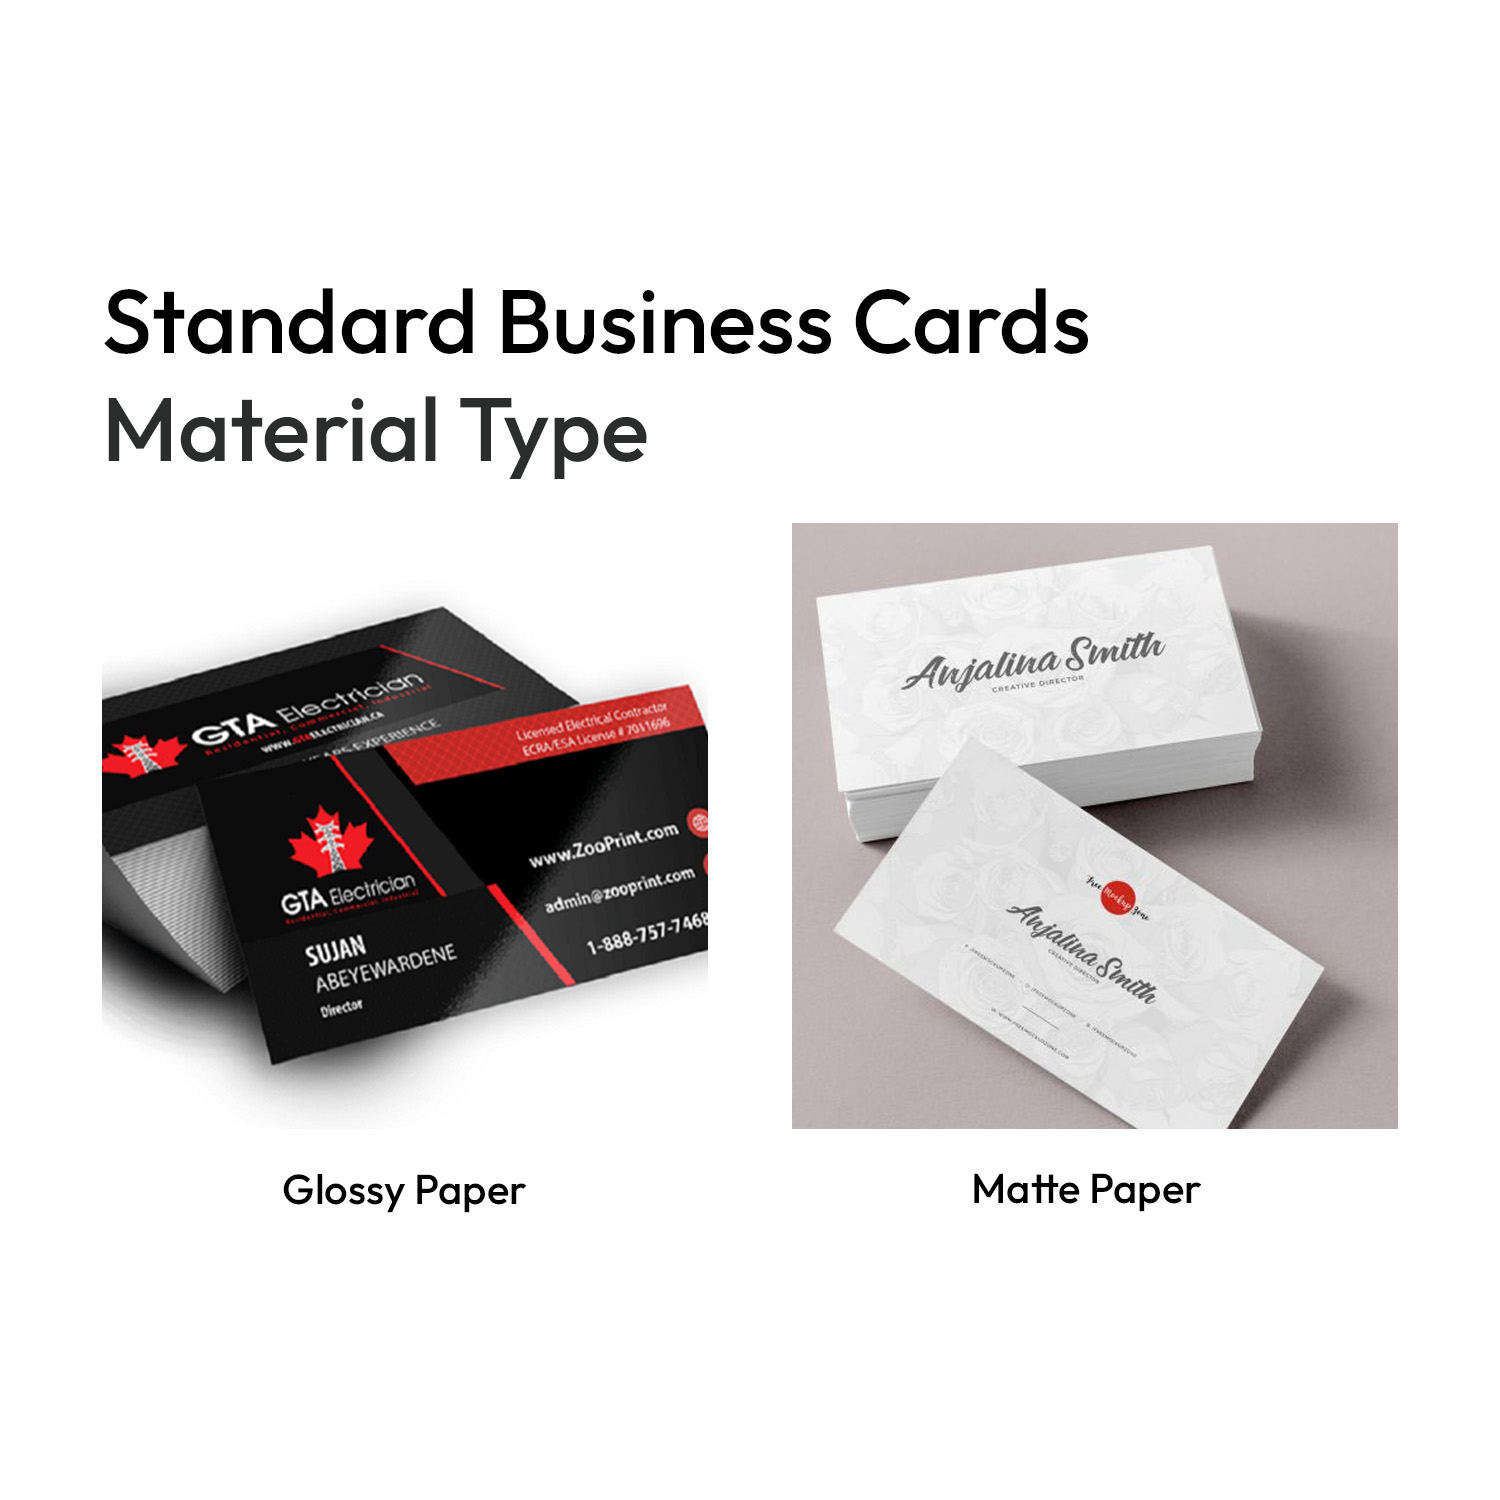 Standard Business Card Material Type